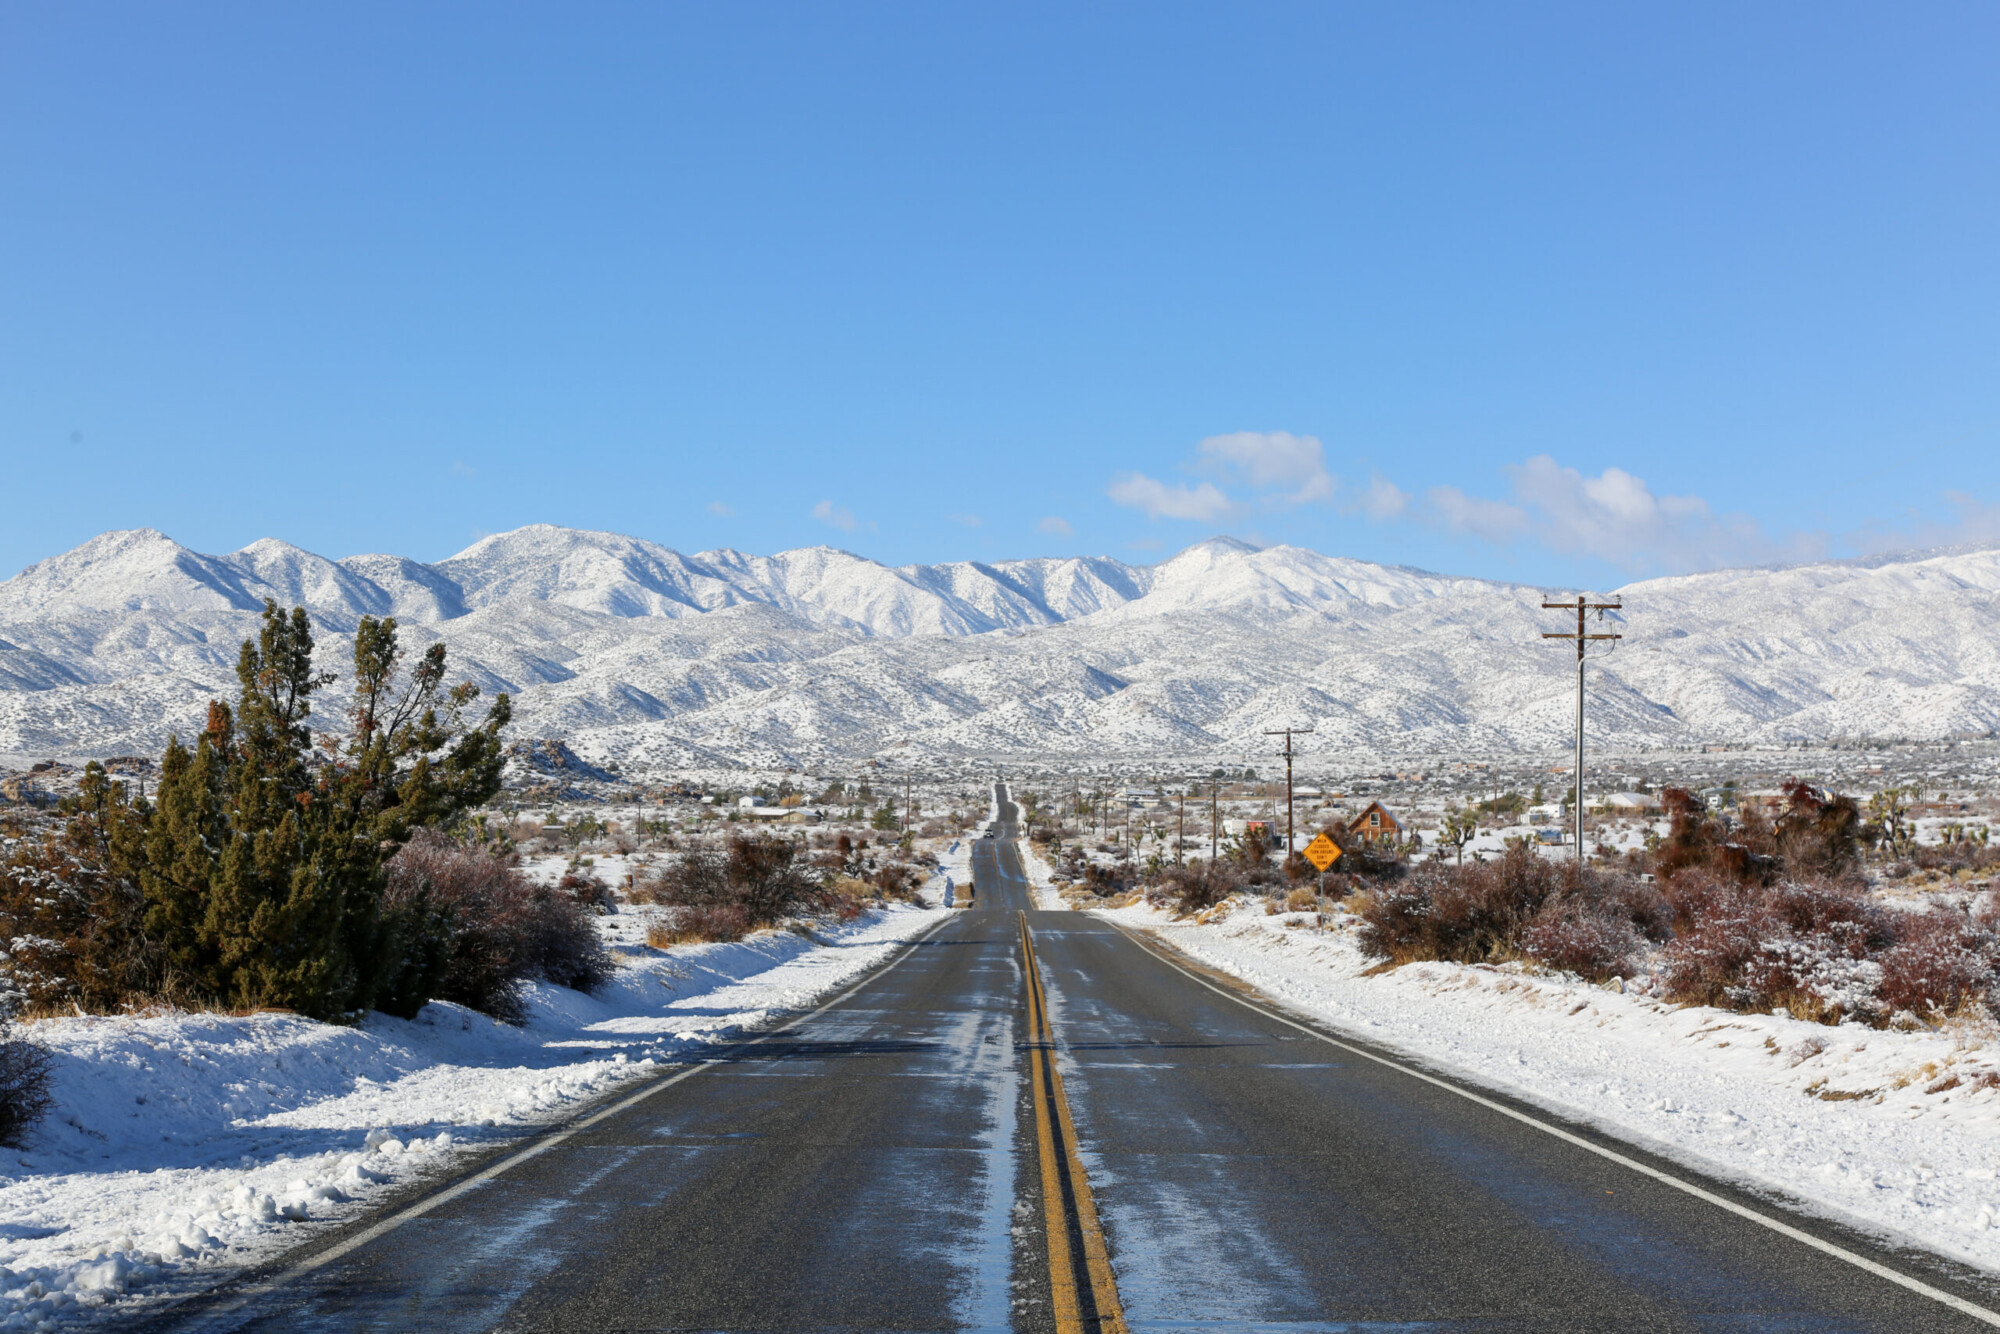 A paved highway flanked in snow with snowy mountains in the background in Pipe's Canyon near Joshua Tree National Park, California.